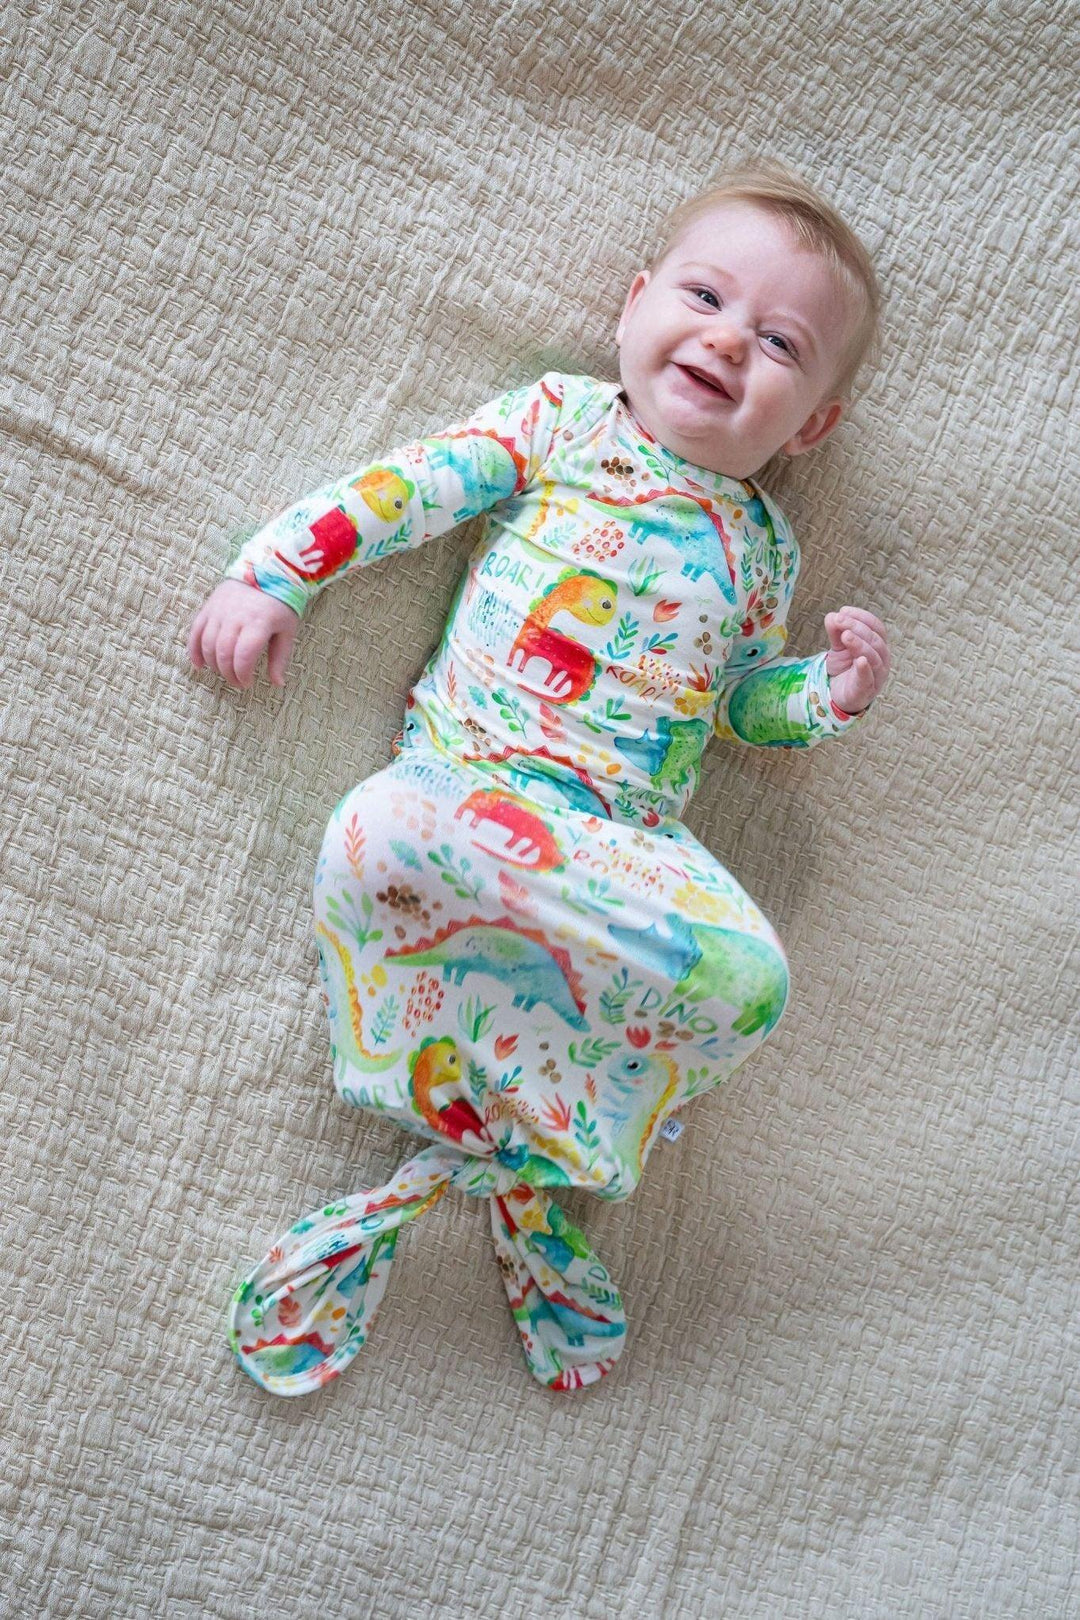 Fun and Vibrant Dinosaur Print Newborn Knotted Gown - Sibling Matching!